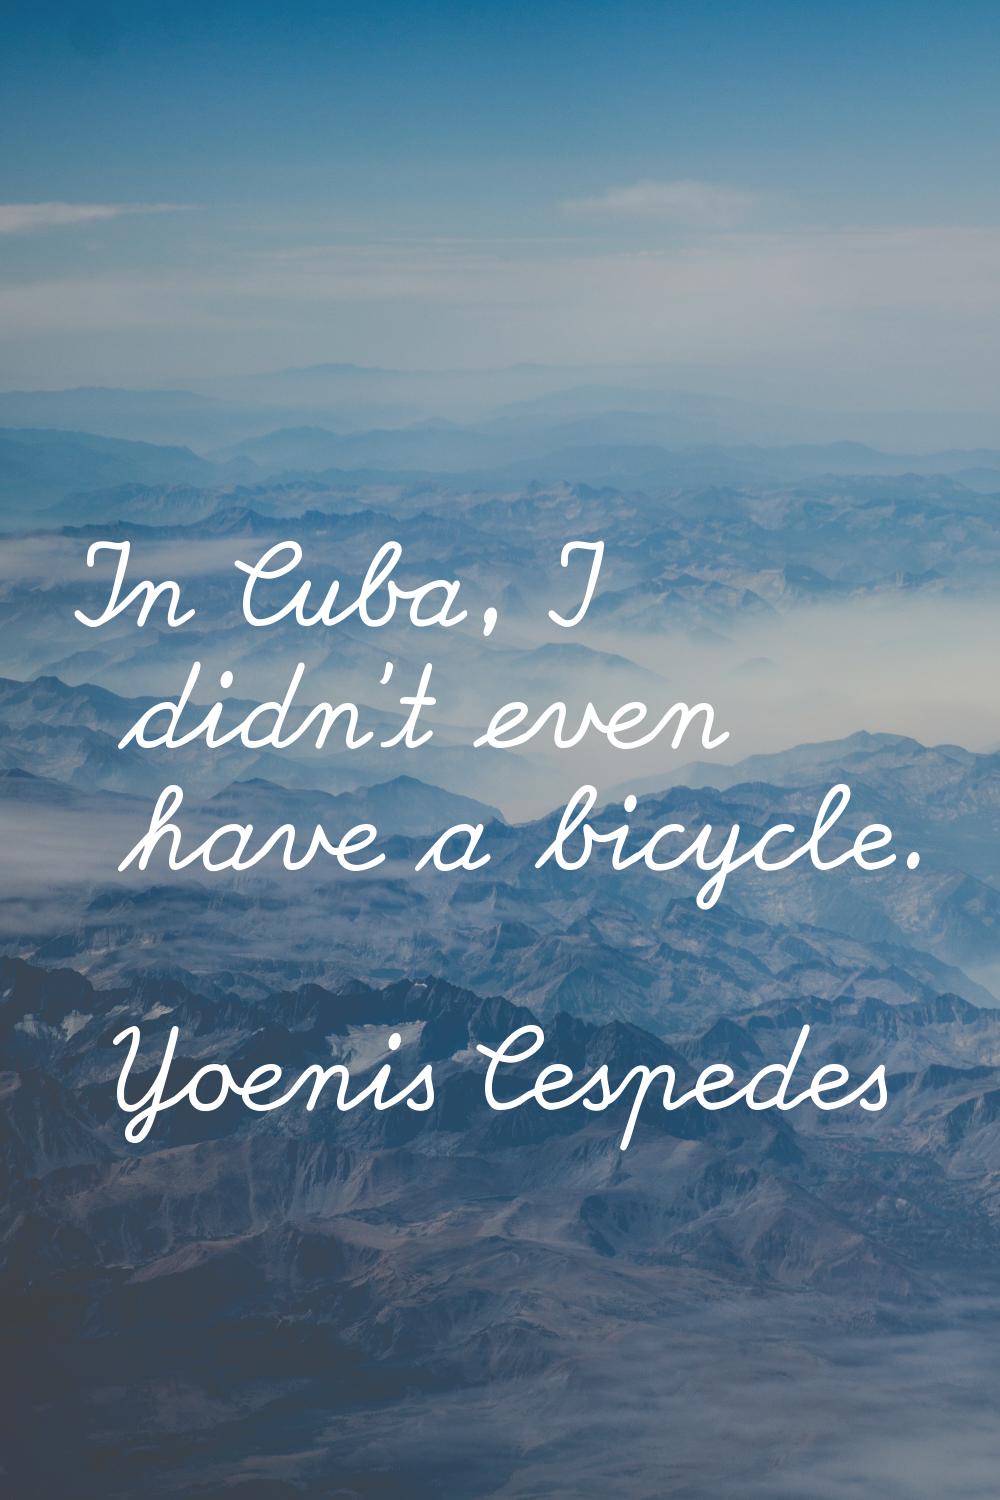 In Cuba, I didn't even have a bicycle.